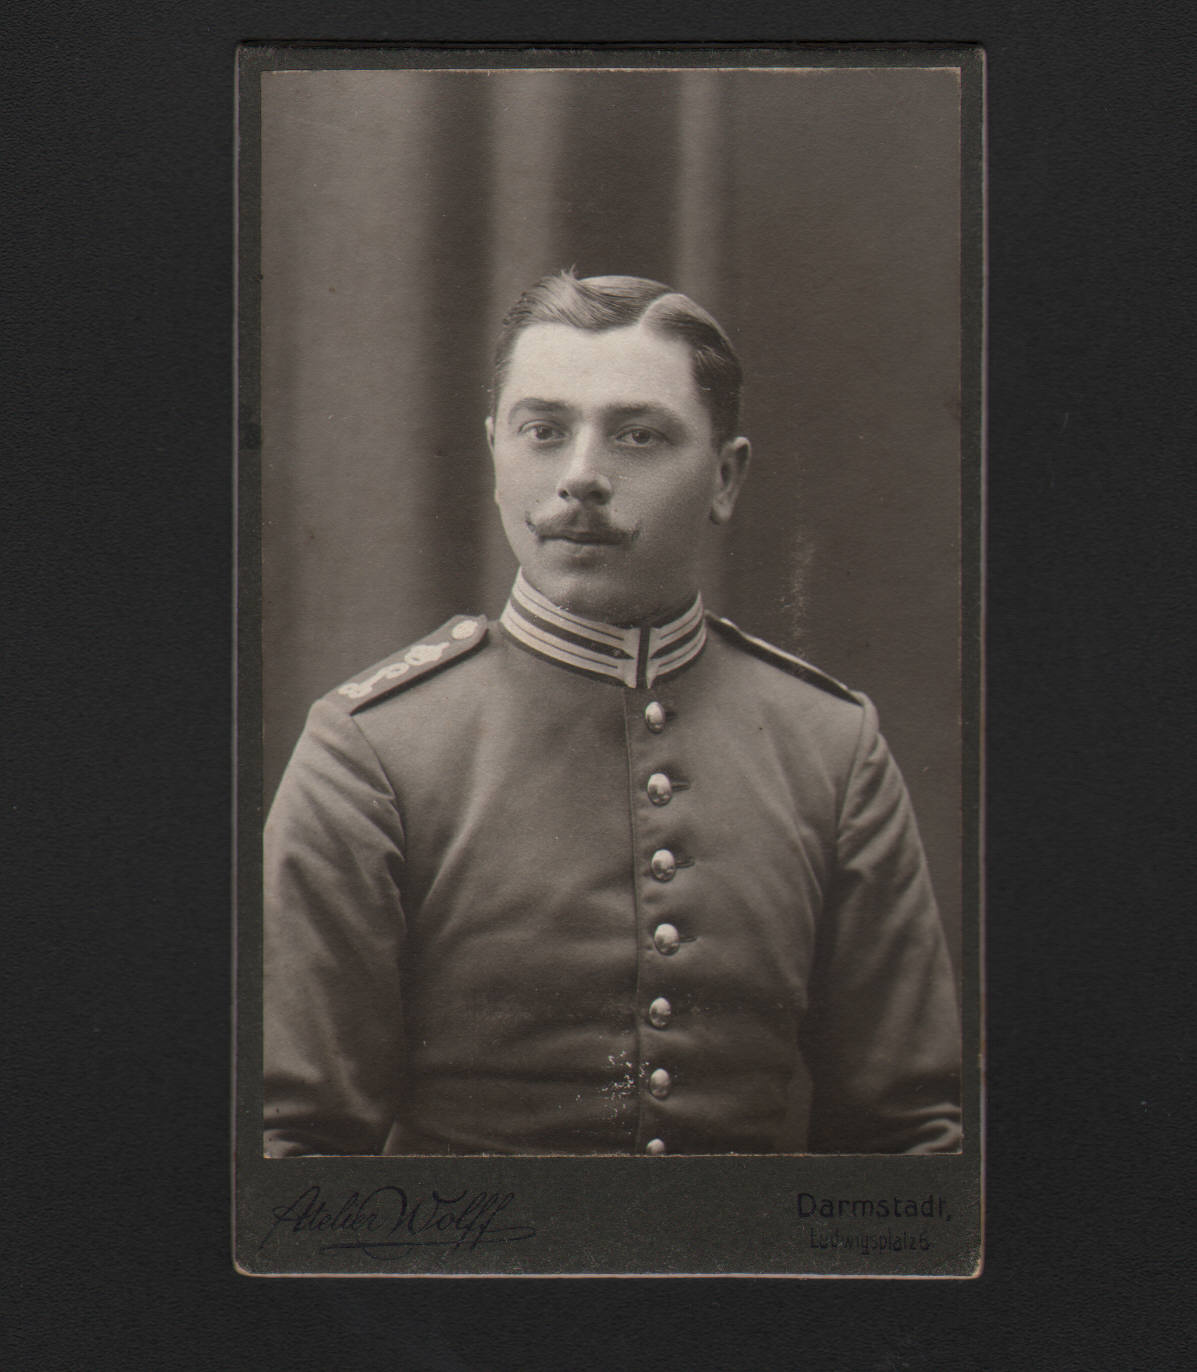 Elsie's father, Leopold Hirsch during WWI